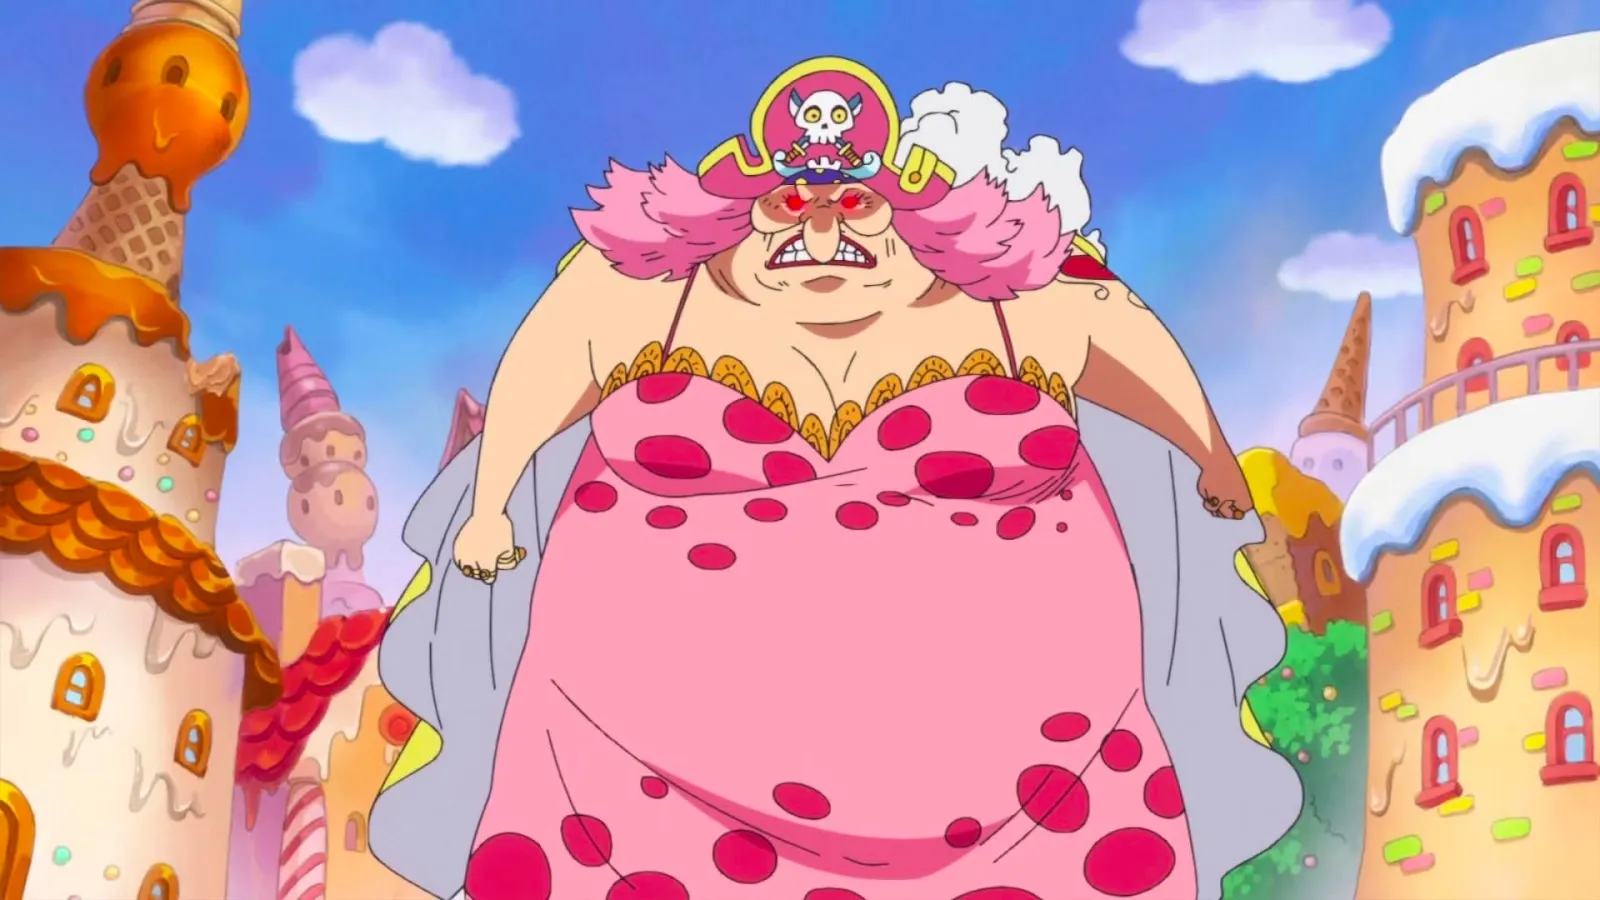 7 Ugly One Piece Characters – From Bad to Worse!